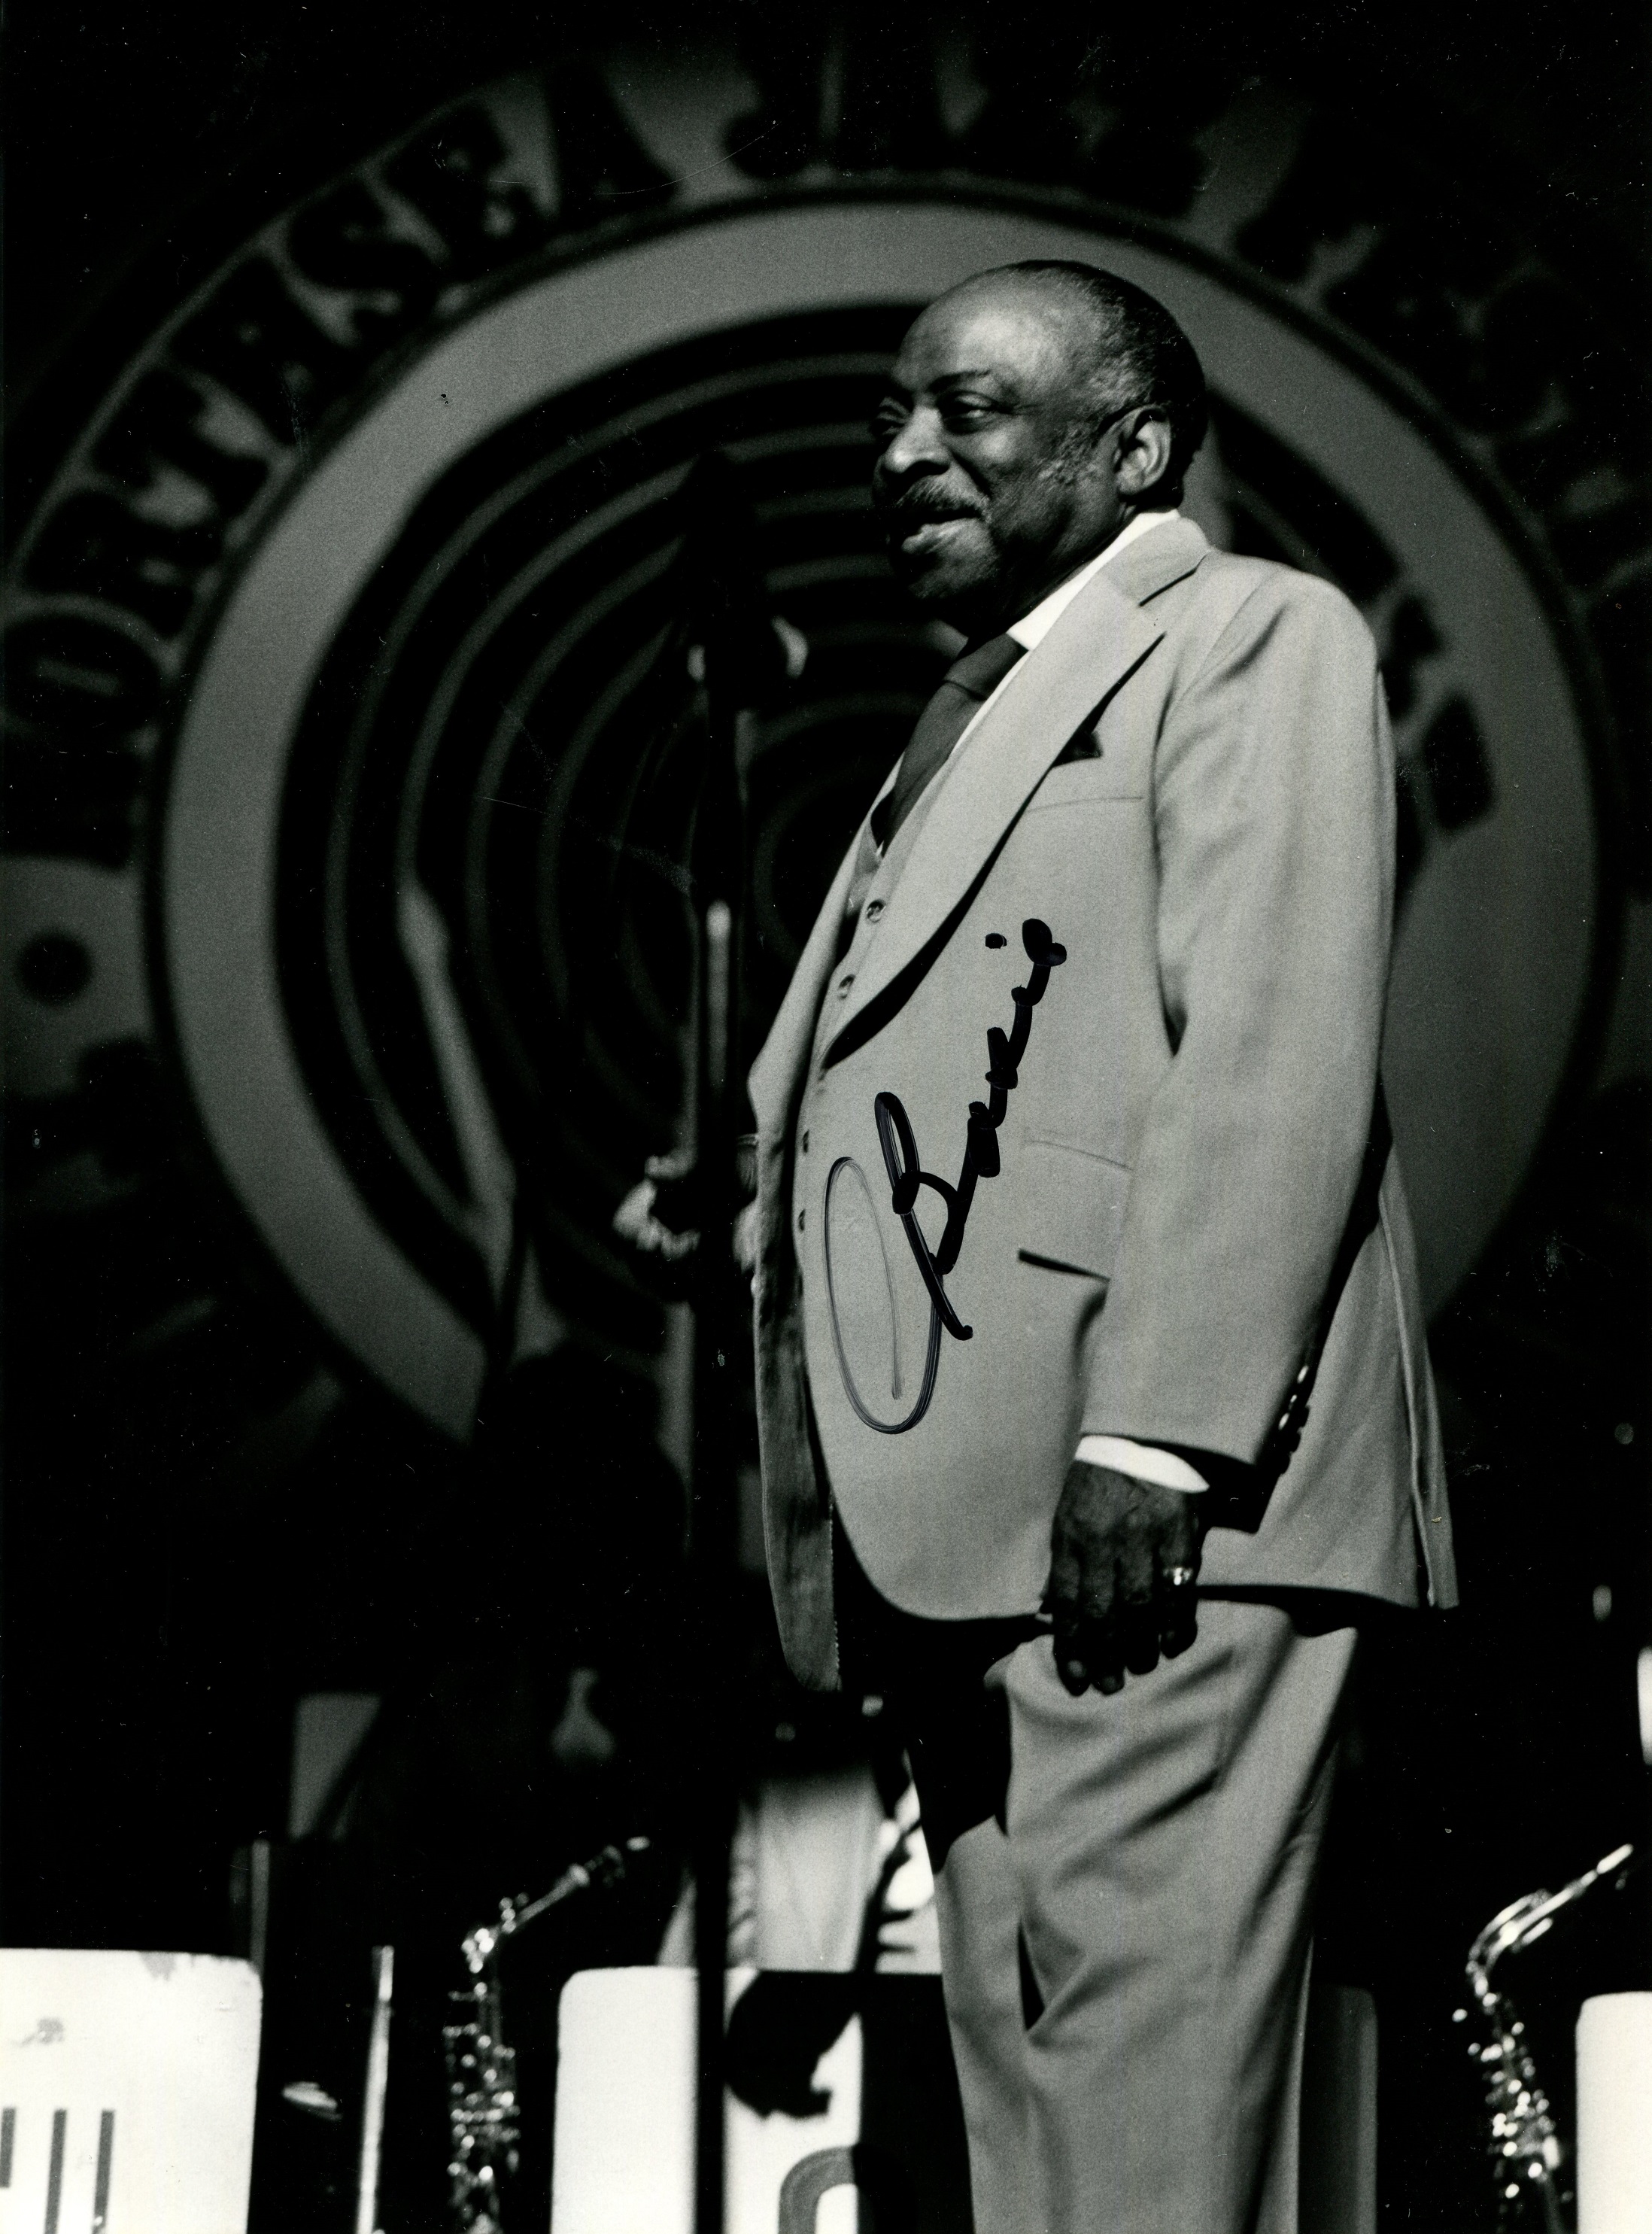 BASIE COUNT: (1904-1984) American jazz Pianist and Composer.